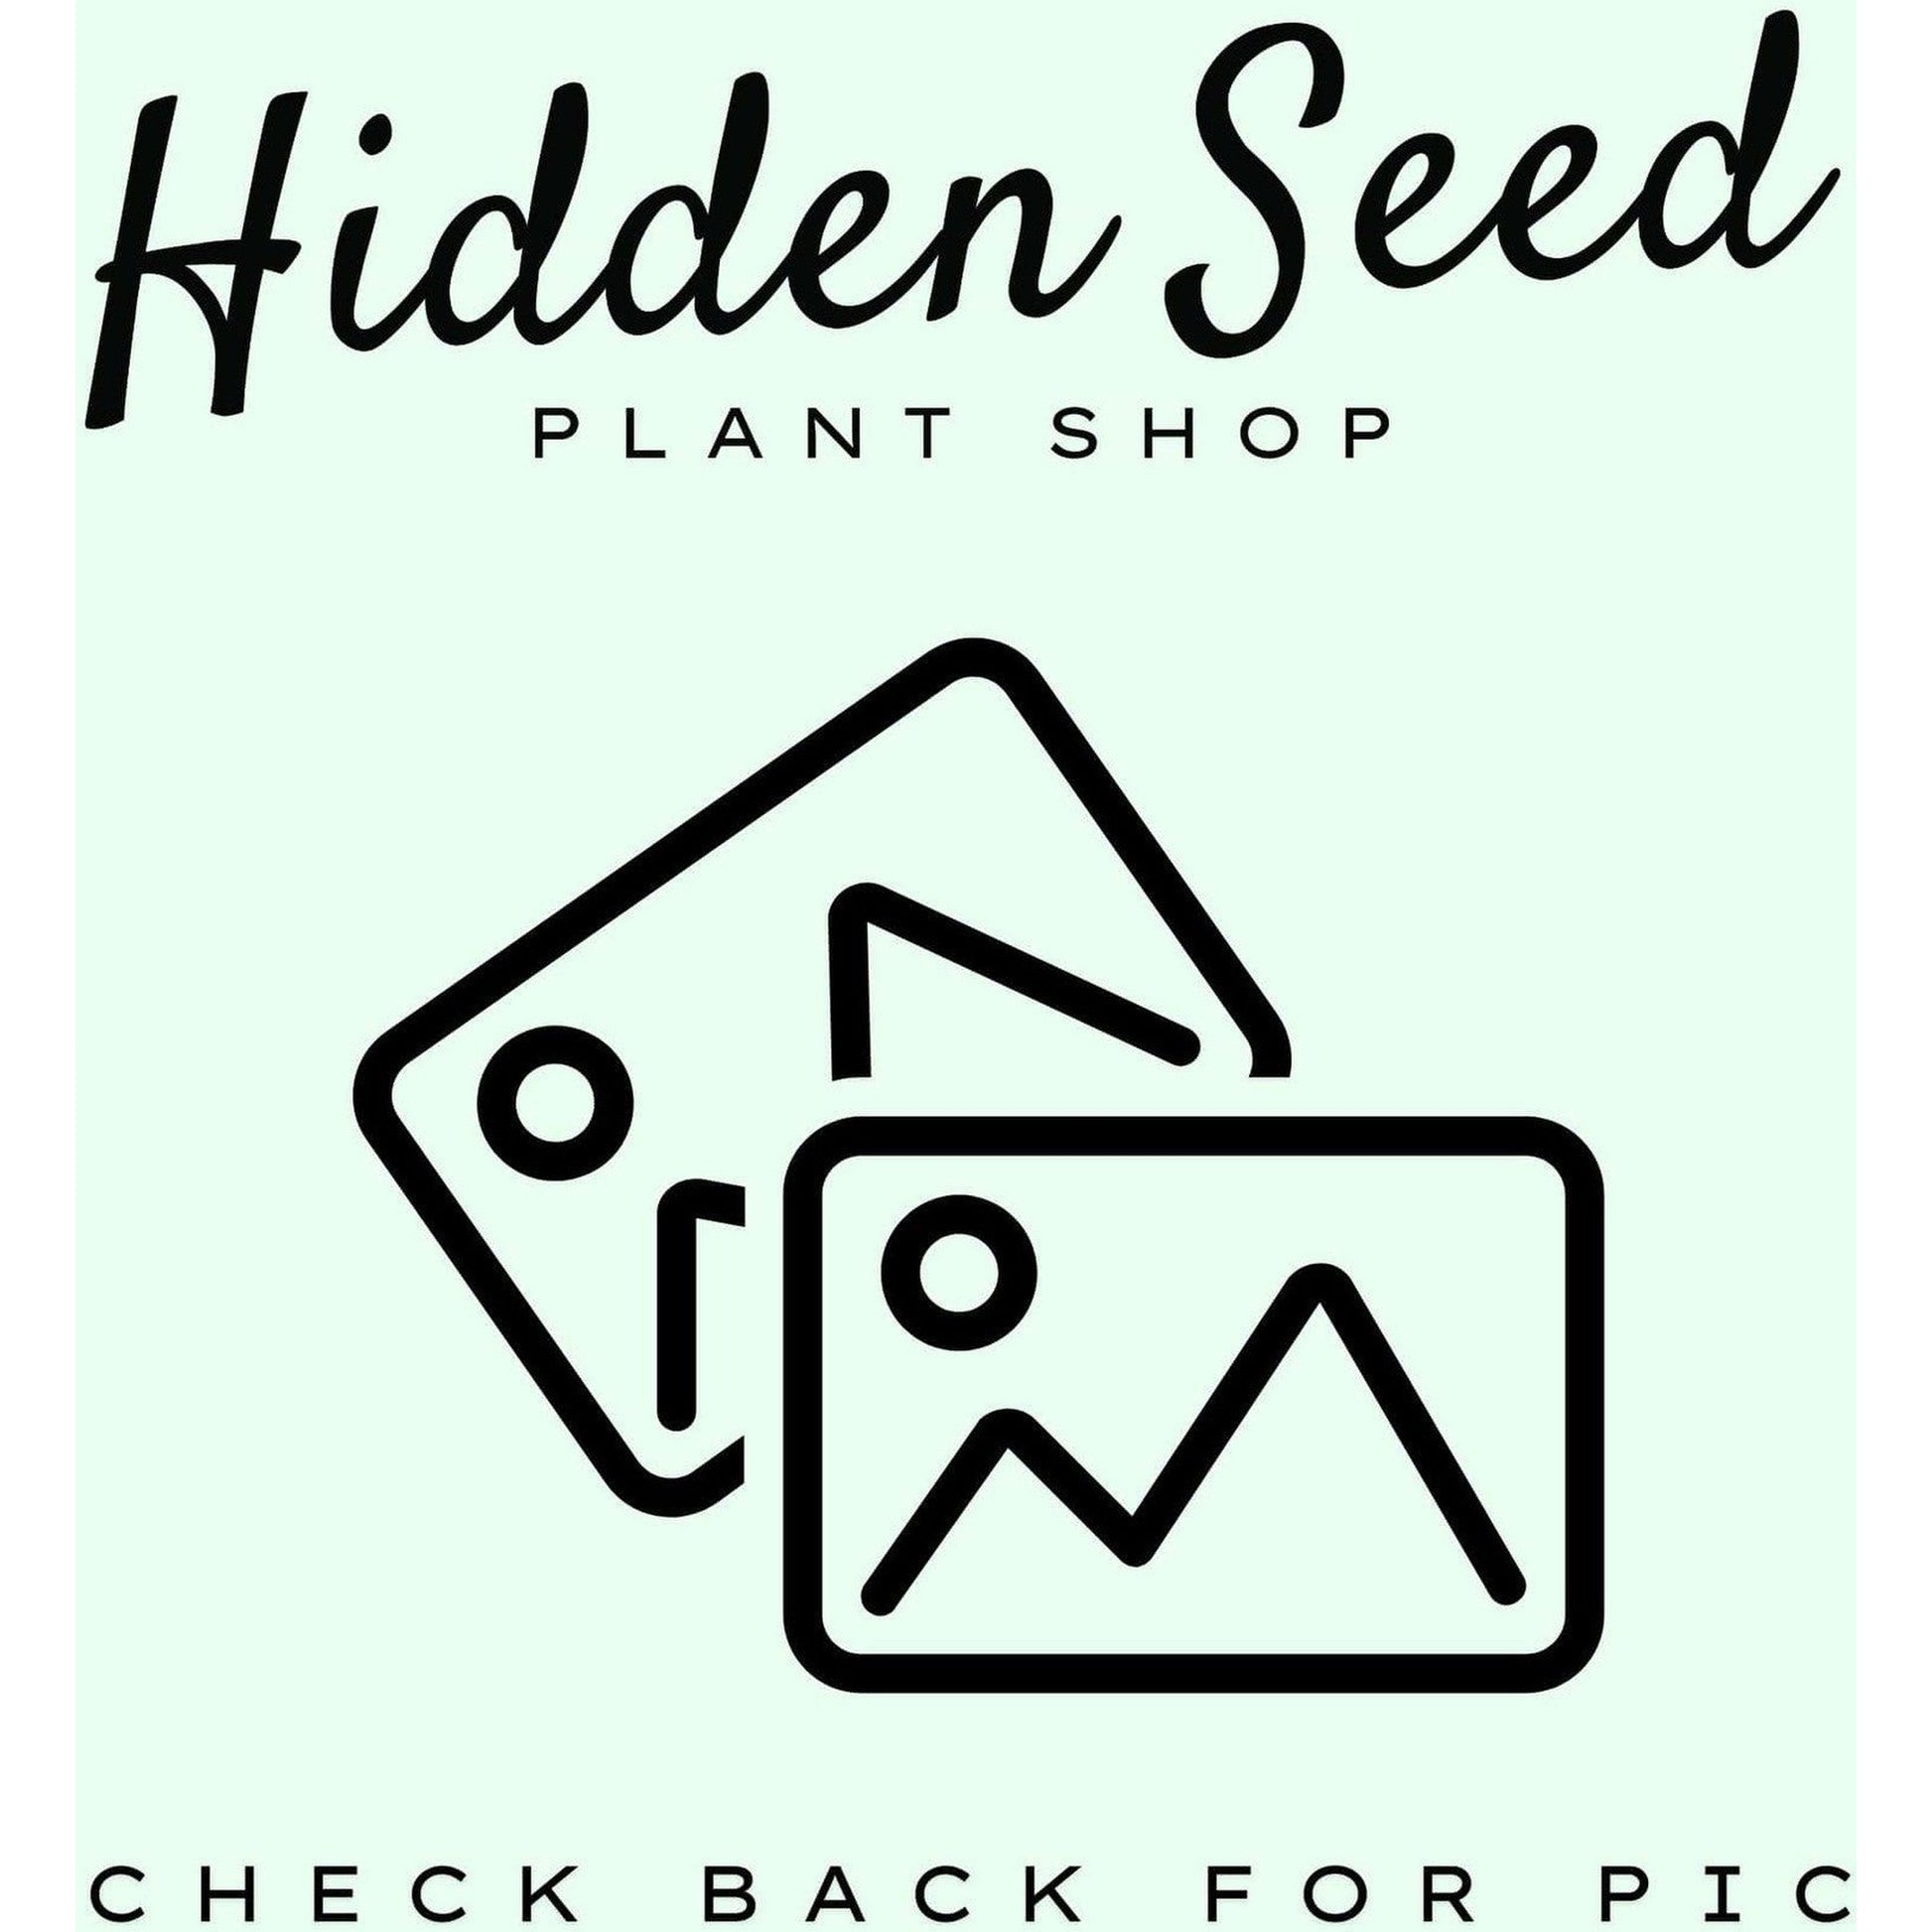 White Chevron Planter on Metal Stand XL-available at Hidden Seed Plant Shop